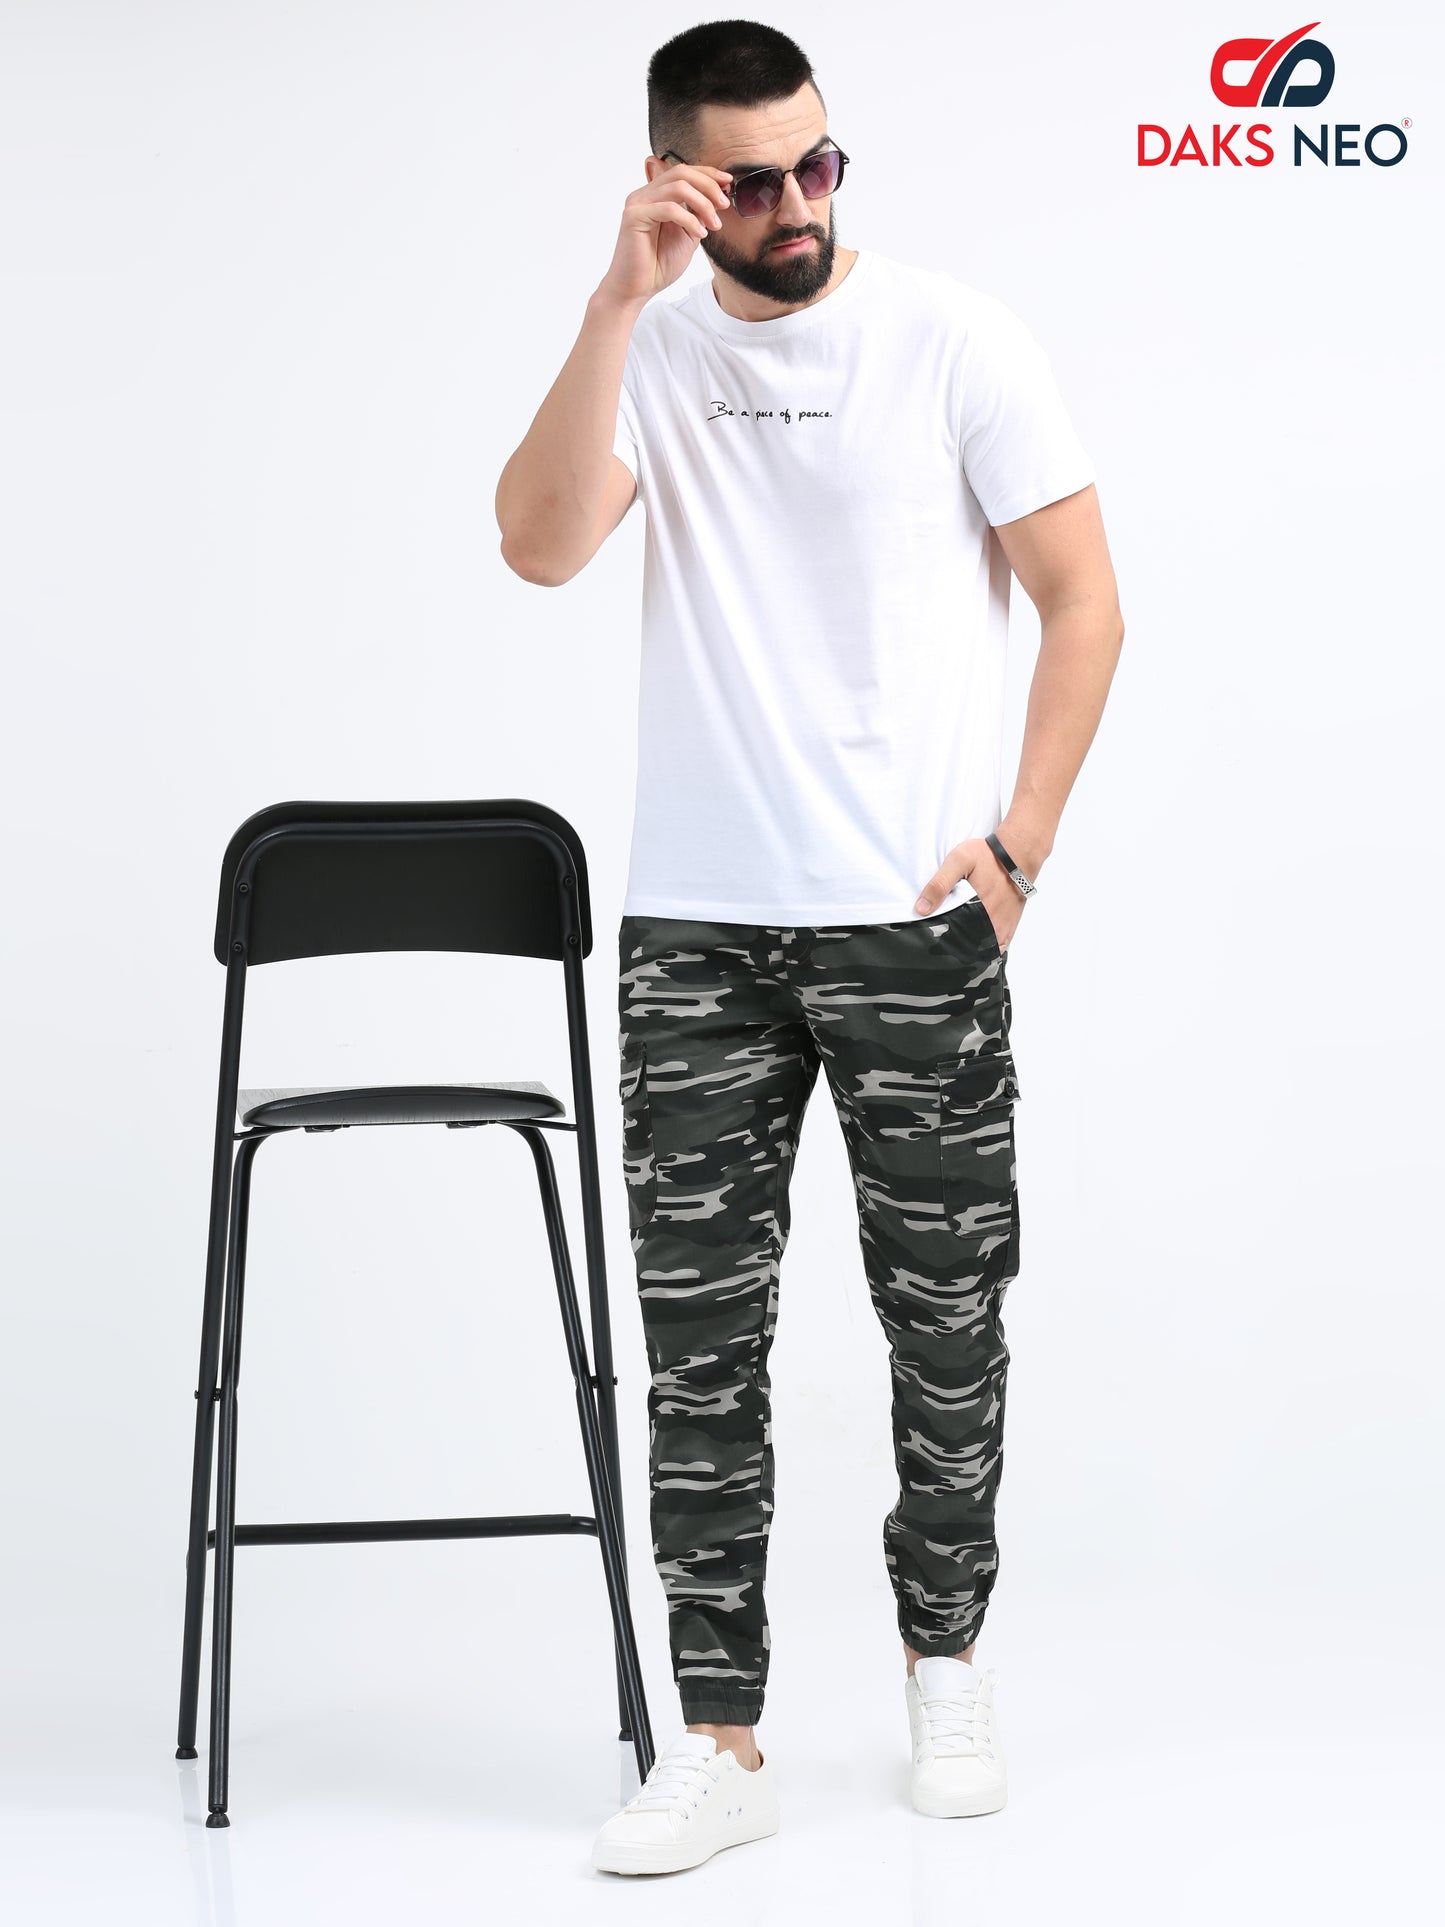 Green Camouflage Joggers